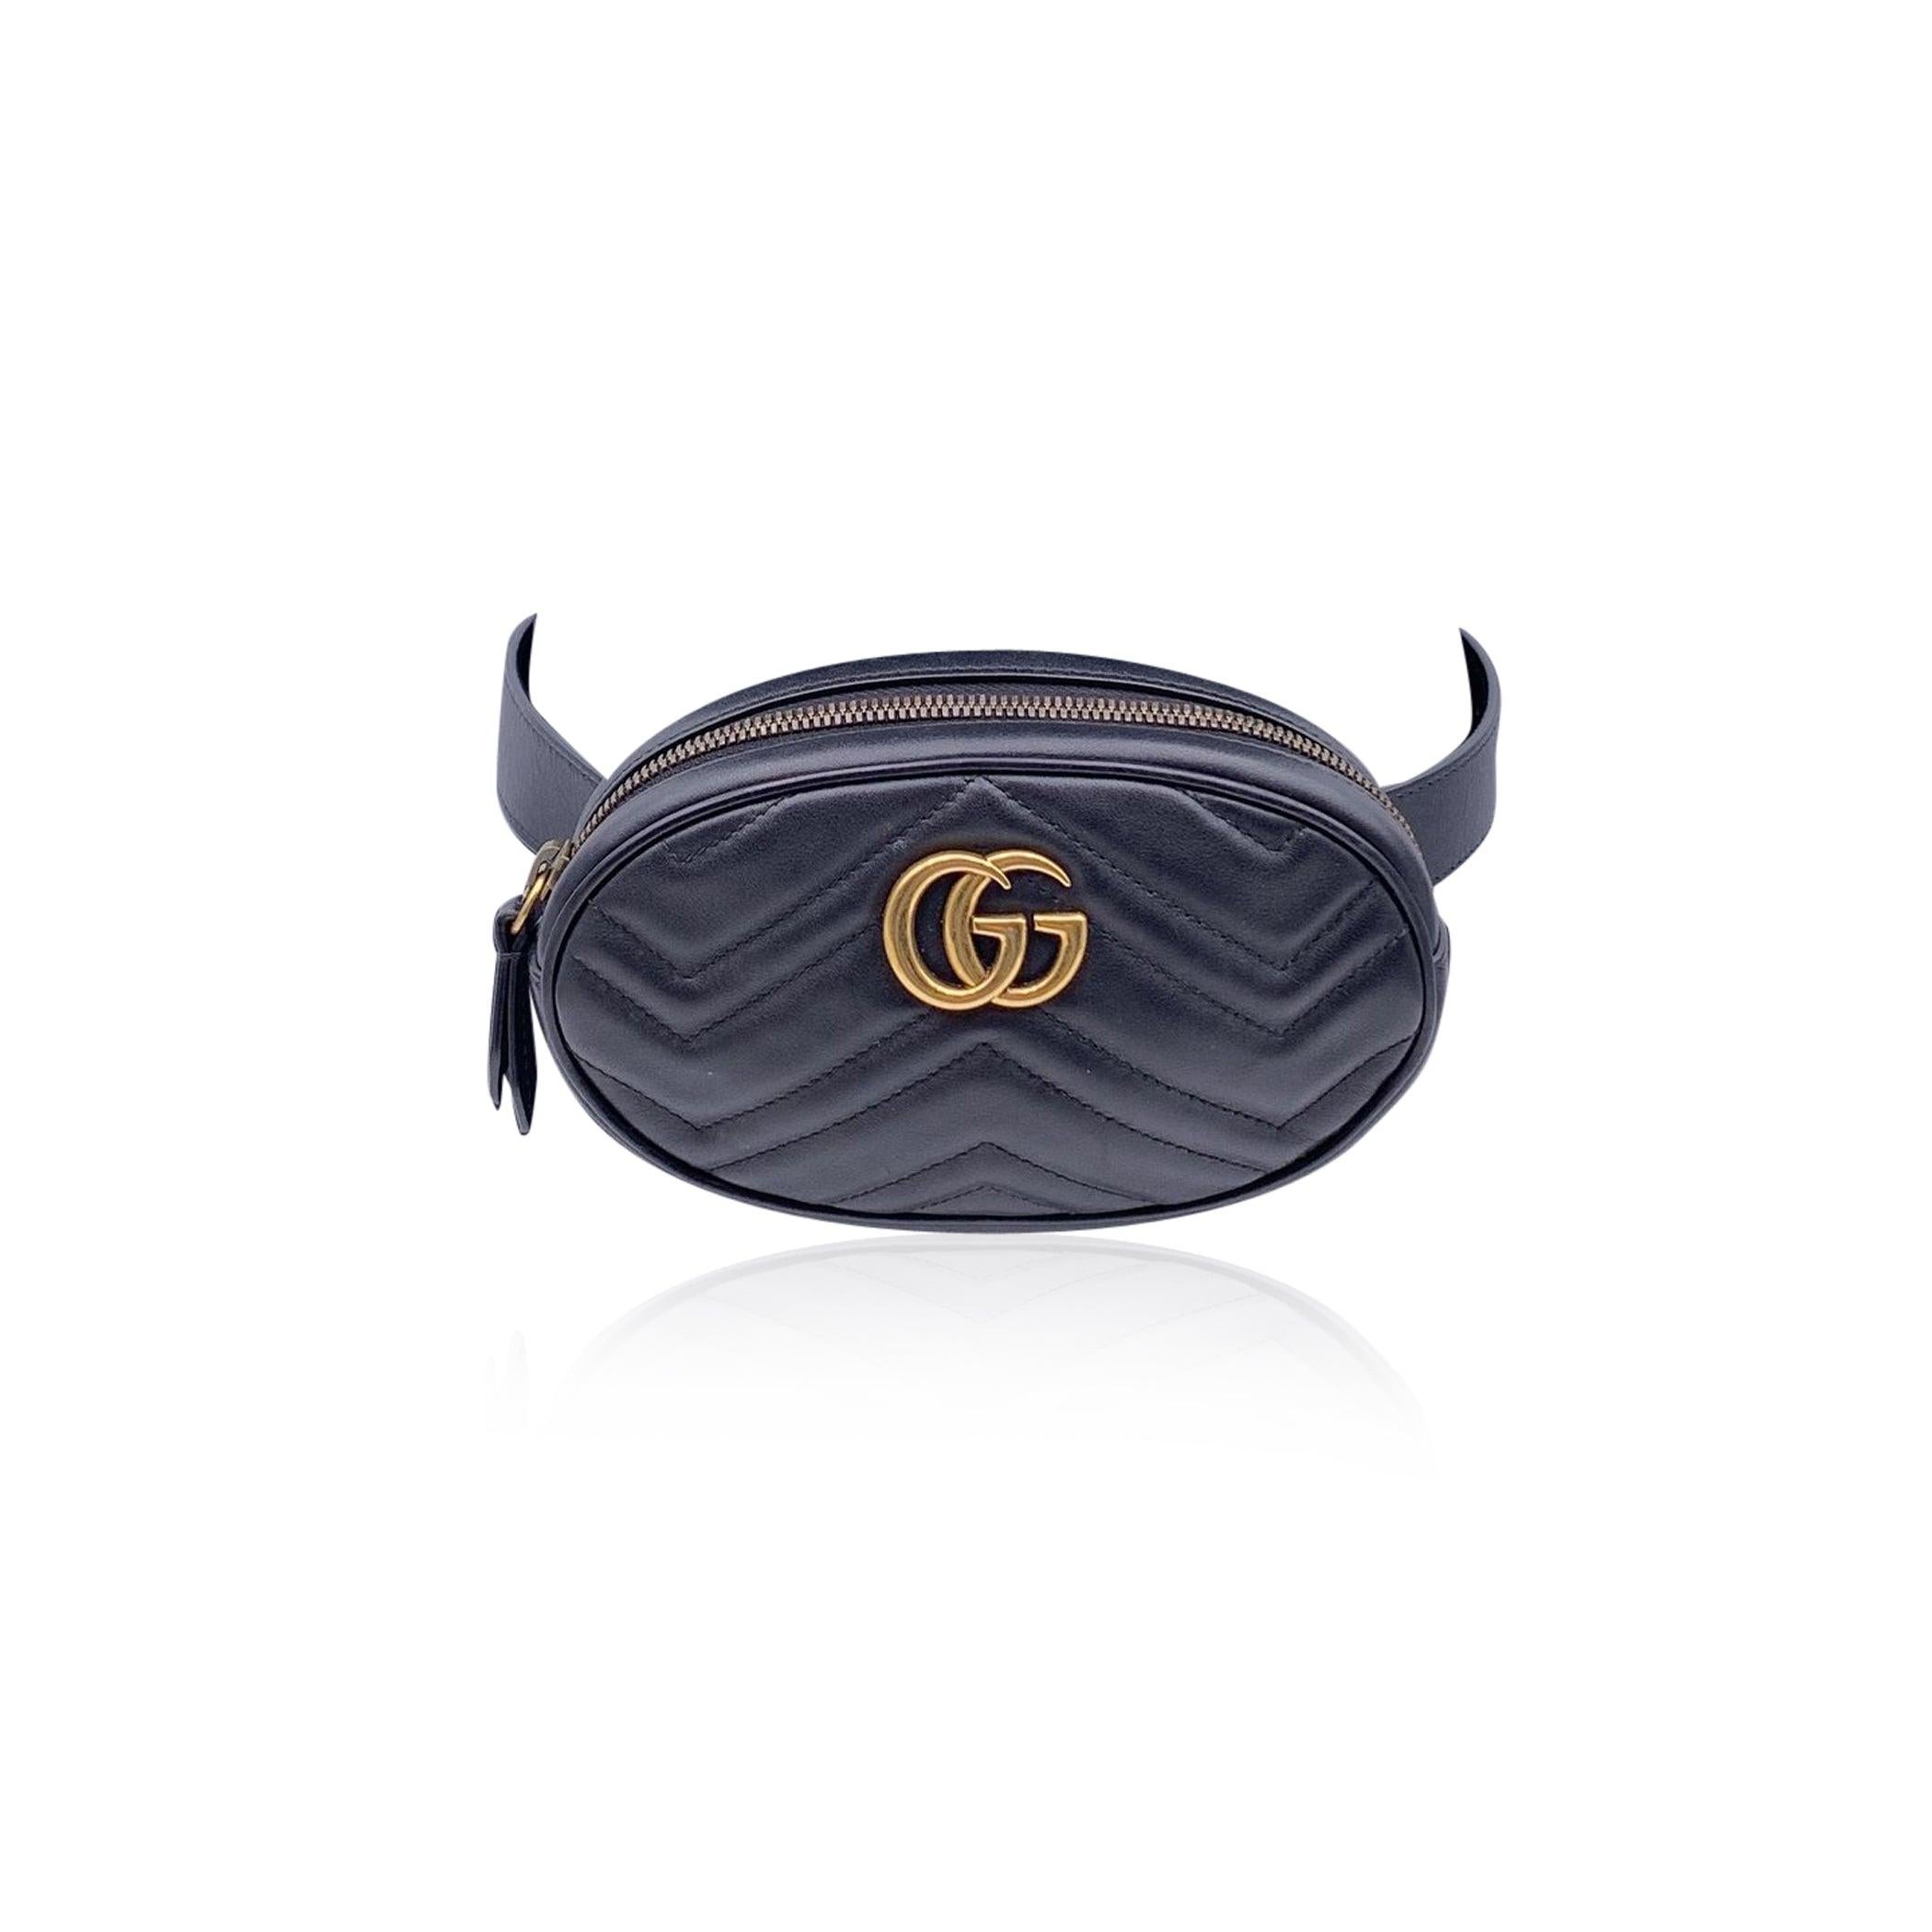 Gucci GG Marmont Belt Bag. in black leather. Chevron quilted leather. Gold metal GG logo on the front. Upper zip closure. 1 open pocket inside. Lined interior. Adjustable belt strap. Size: 65/26 - Size 34 IT. 'Gucci - Made in Italy' tag inside (with